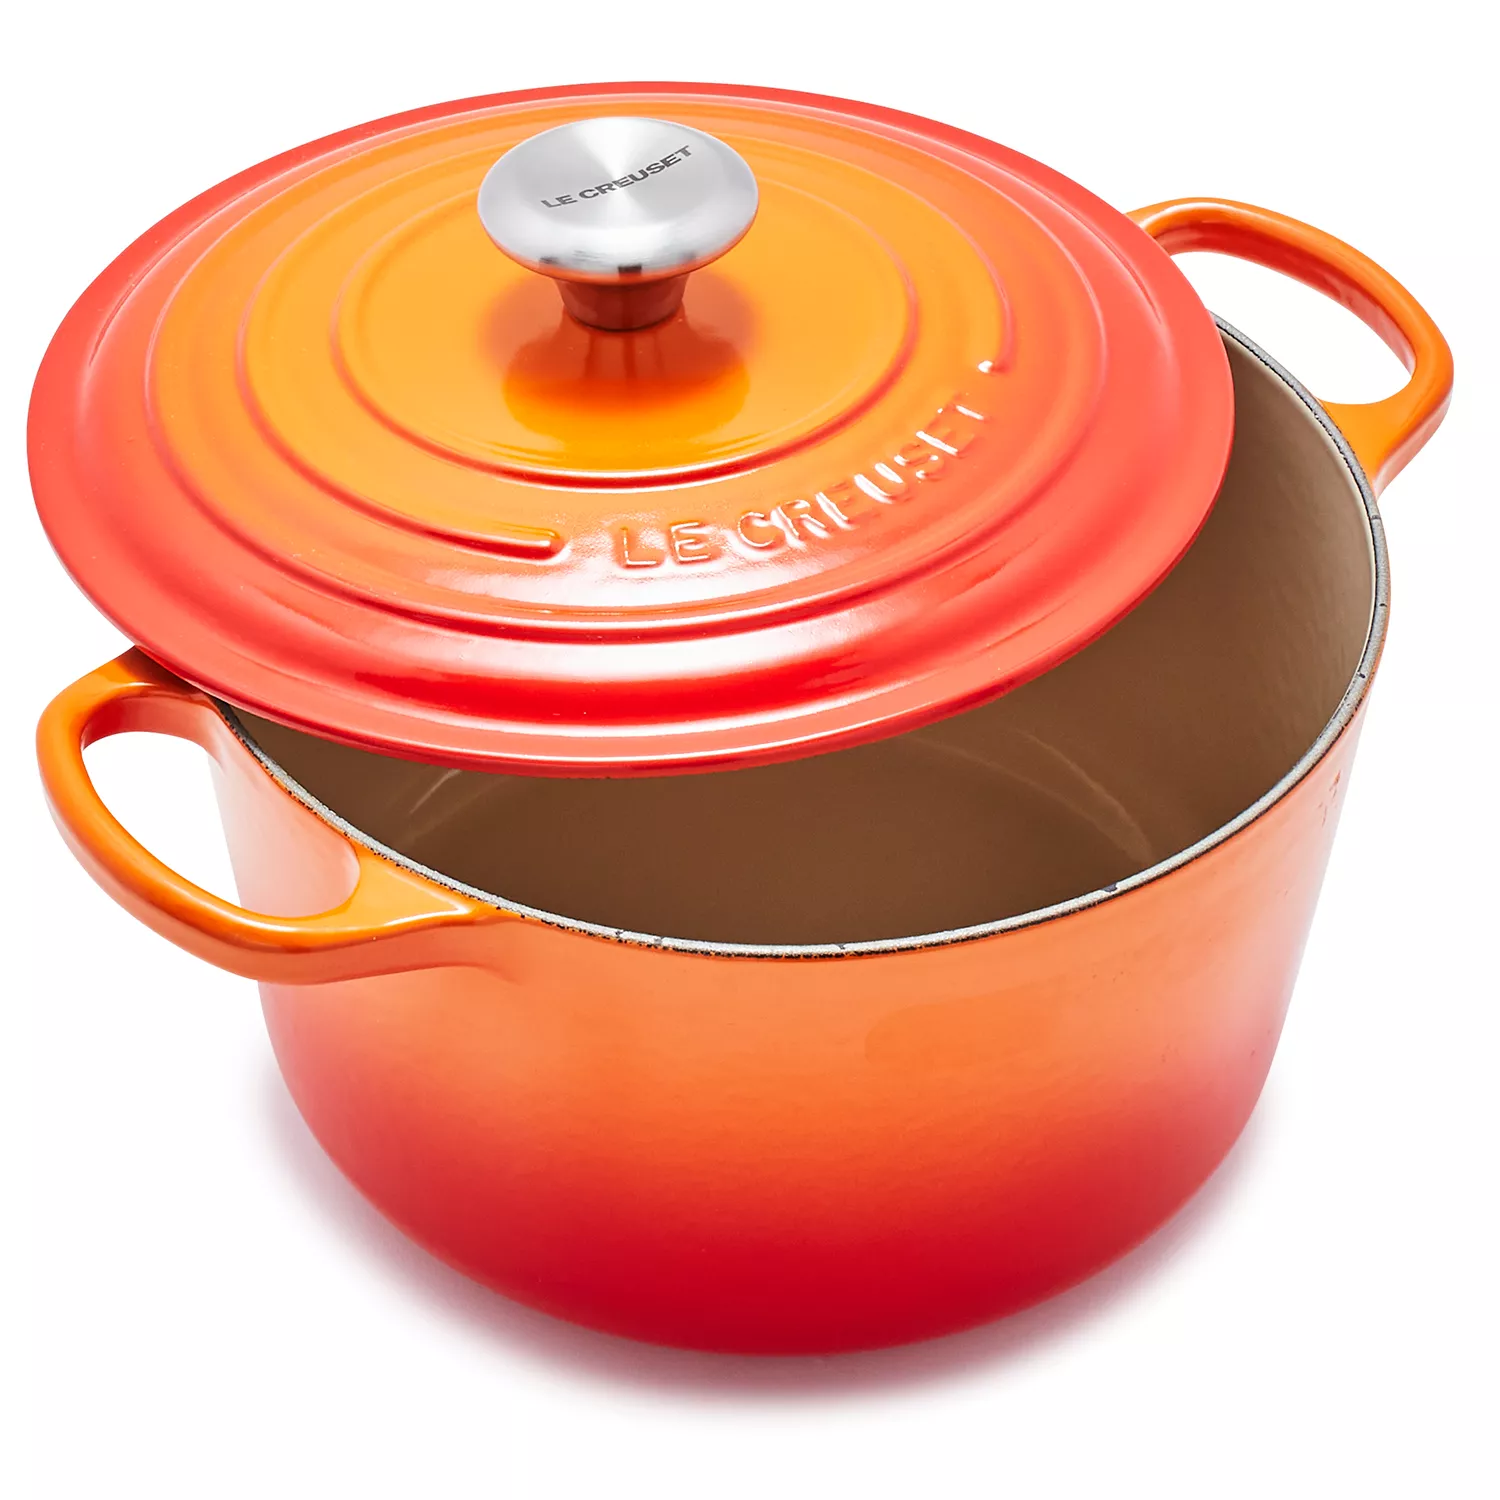 Discontinued 5.25 Quart Dutch Oven with Cover